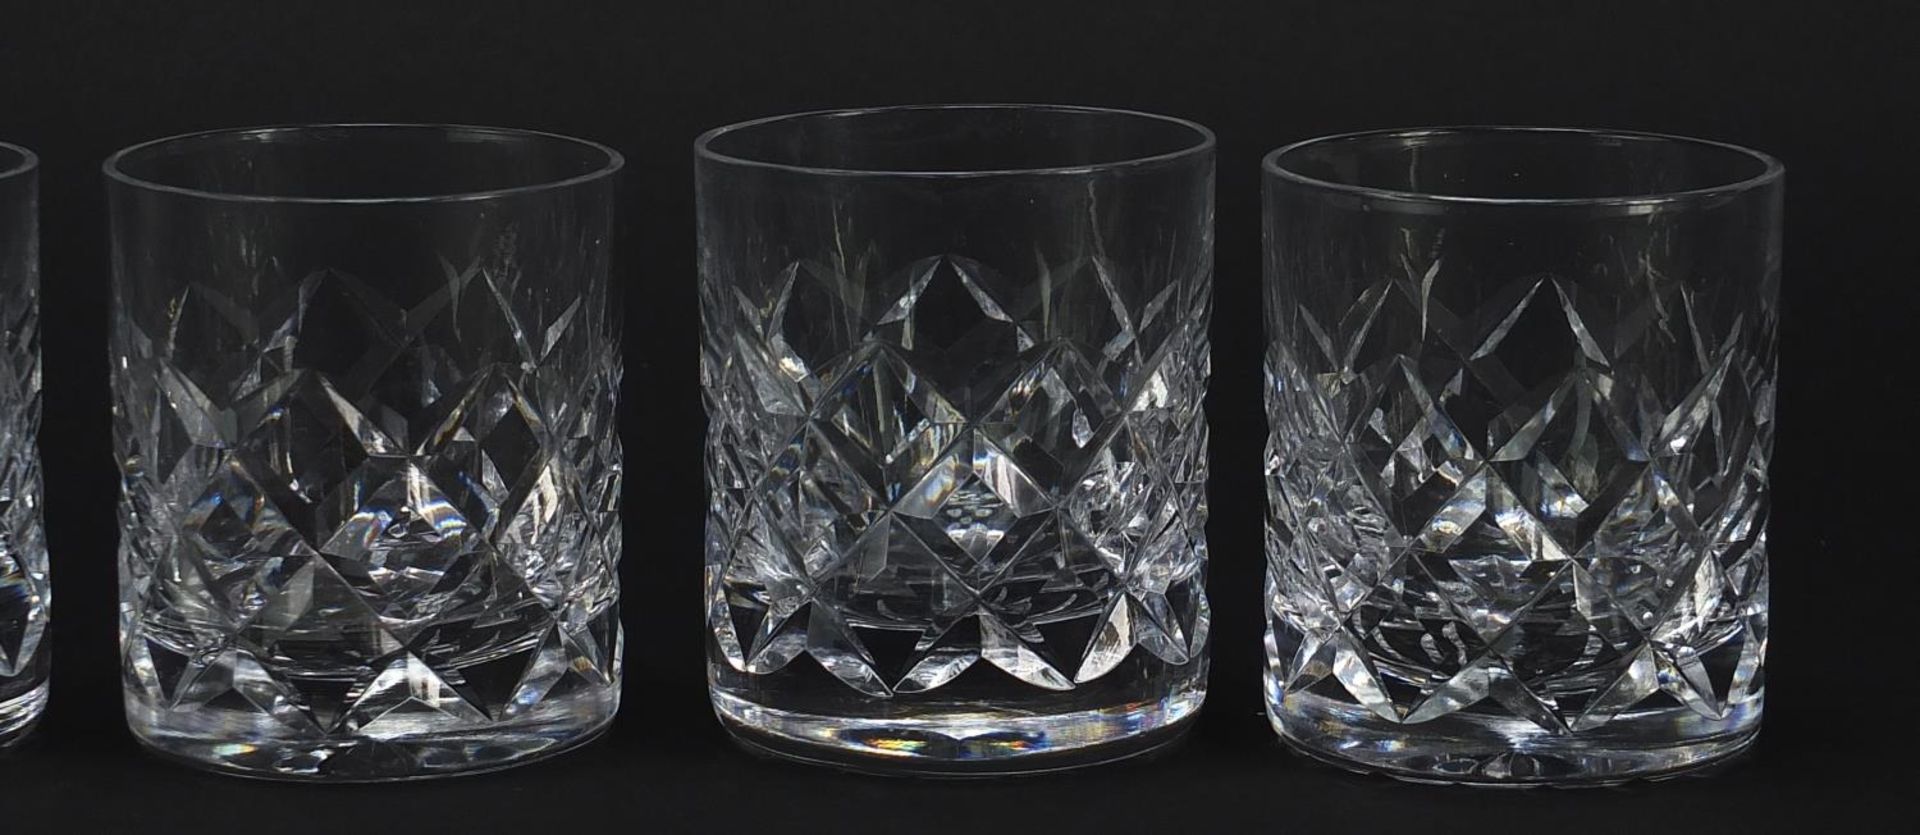 Six lead crystal whiskey tumblers, 8cm high - Image 3 of 6